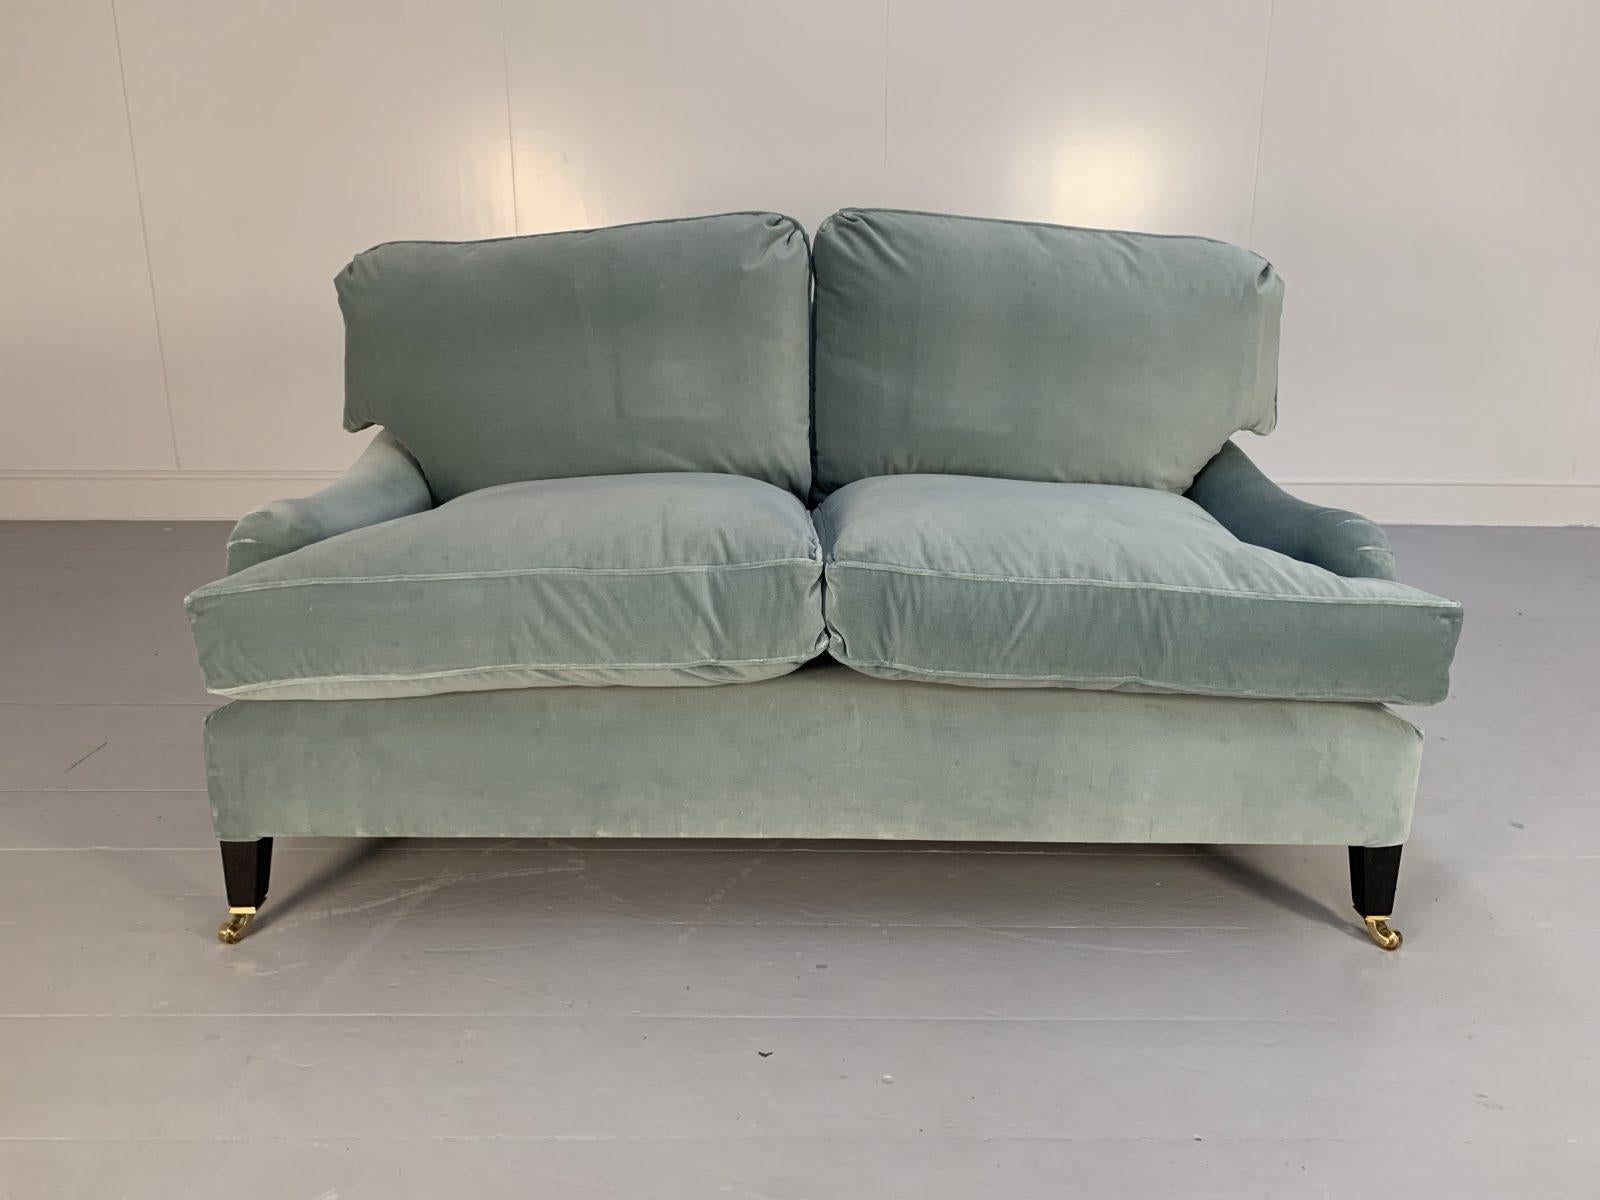 Hello Friends, and welcome to another unmissable offering from Lord Browns Furniture, the UK’s premier resource for fine Sofas and Chairs.

On offer on this occasion is, quite possibly, the only sofa you might ever need to buy.

This is an